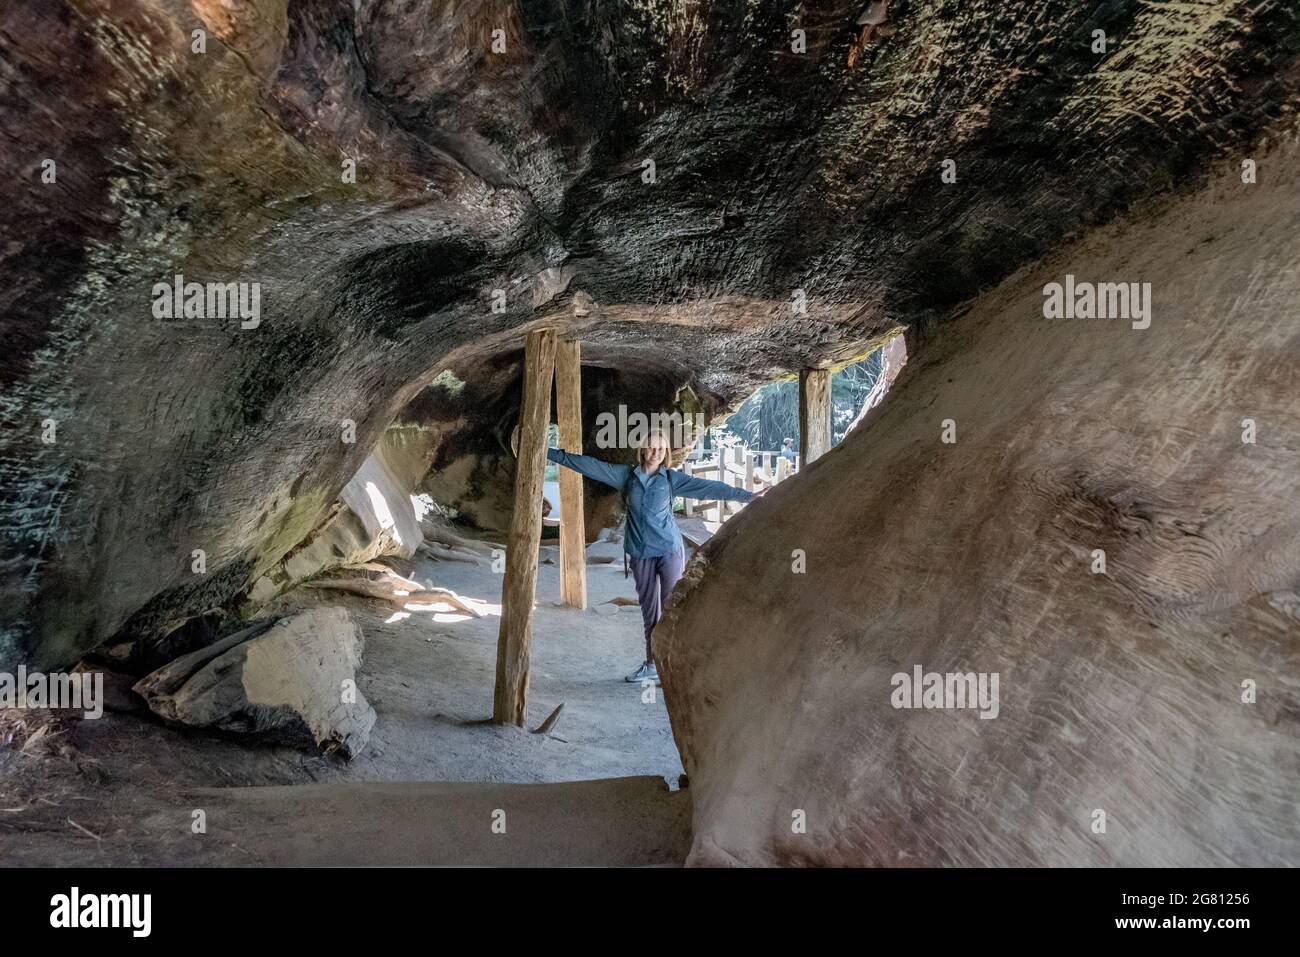 A young woman poses inside the Fallen Monarch hollow tunnel tree visitors can walk through inside Grant Grove of giant sequoias. Stock Photo